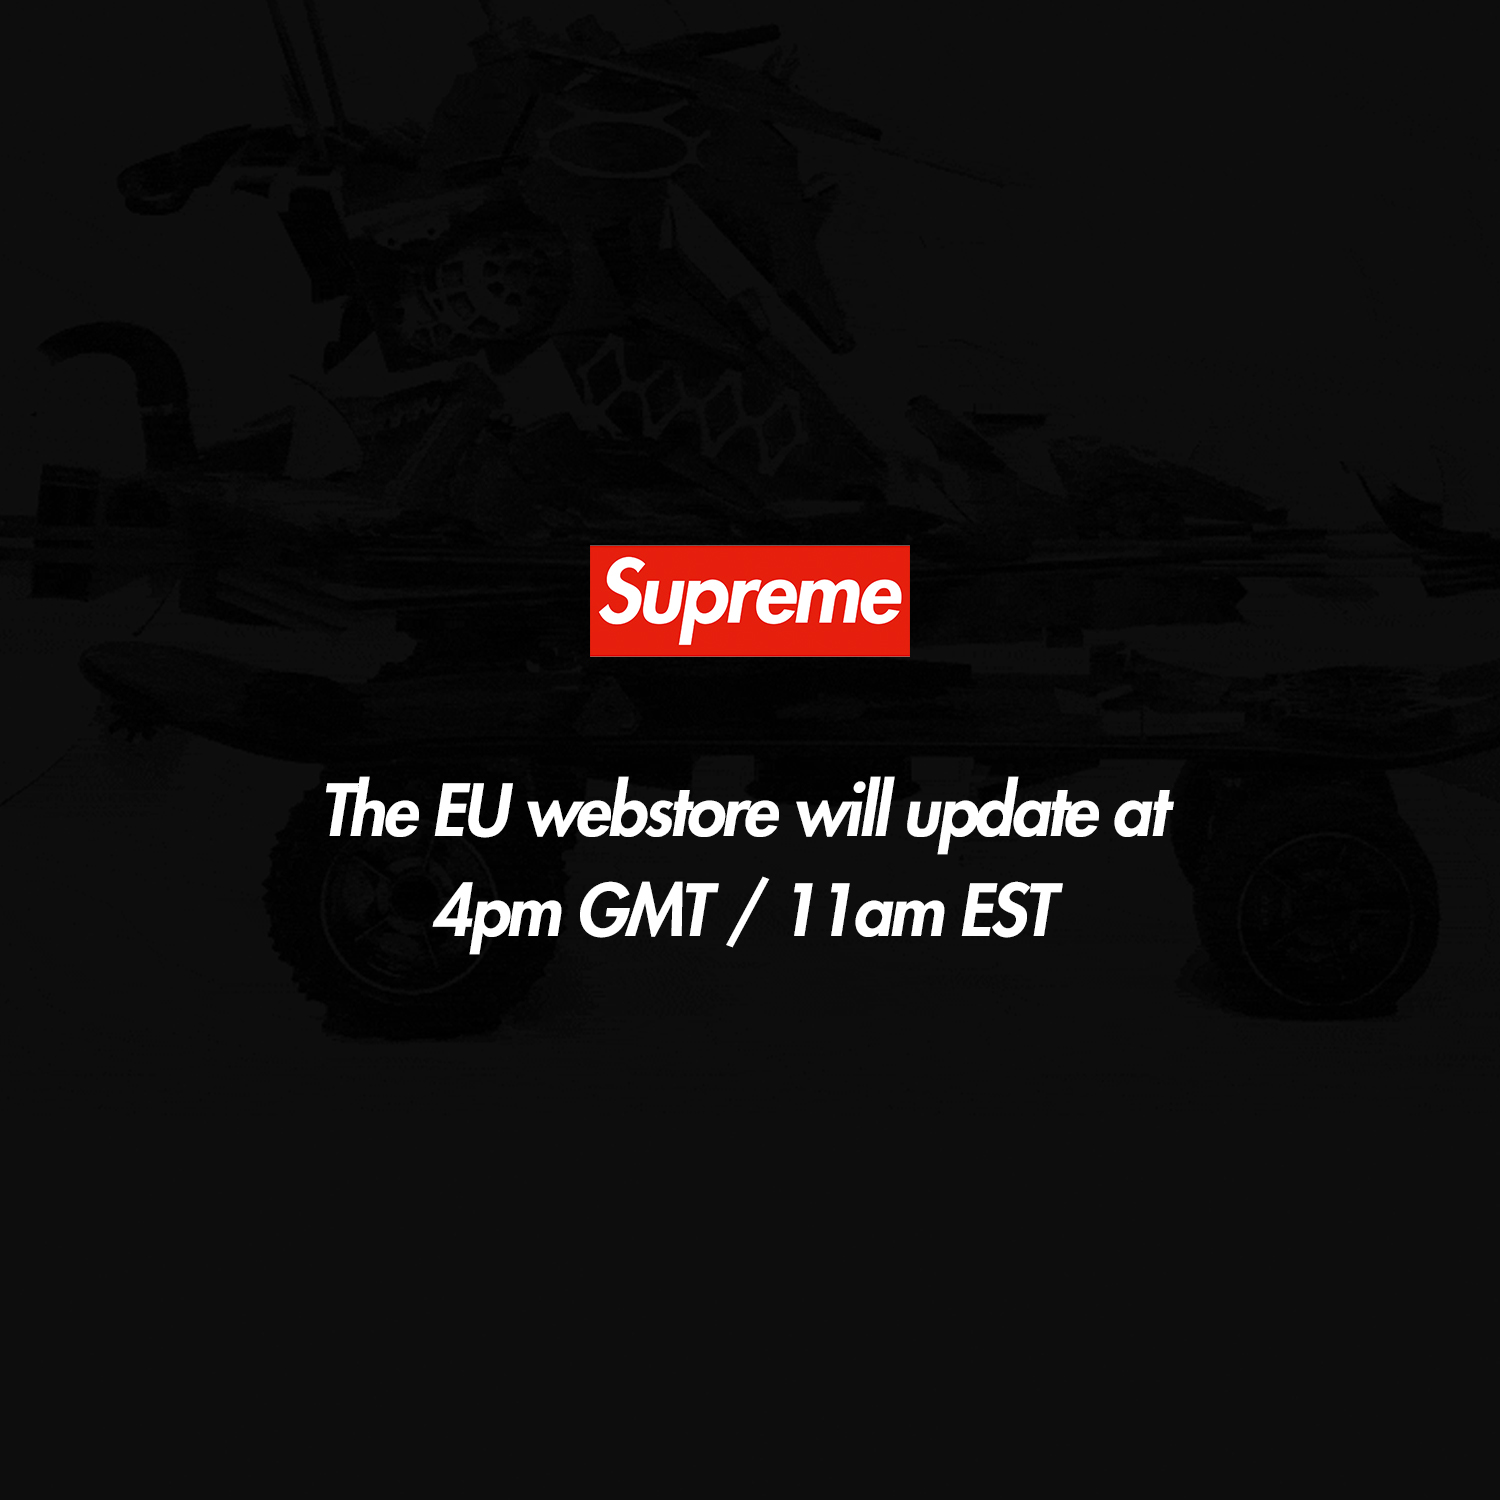 Supreme Drops on "Supreme Europe website will update at 4pm GMT / 11am EST today 🚨 https://t.co/6C612Ayfyl" / Twitter